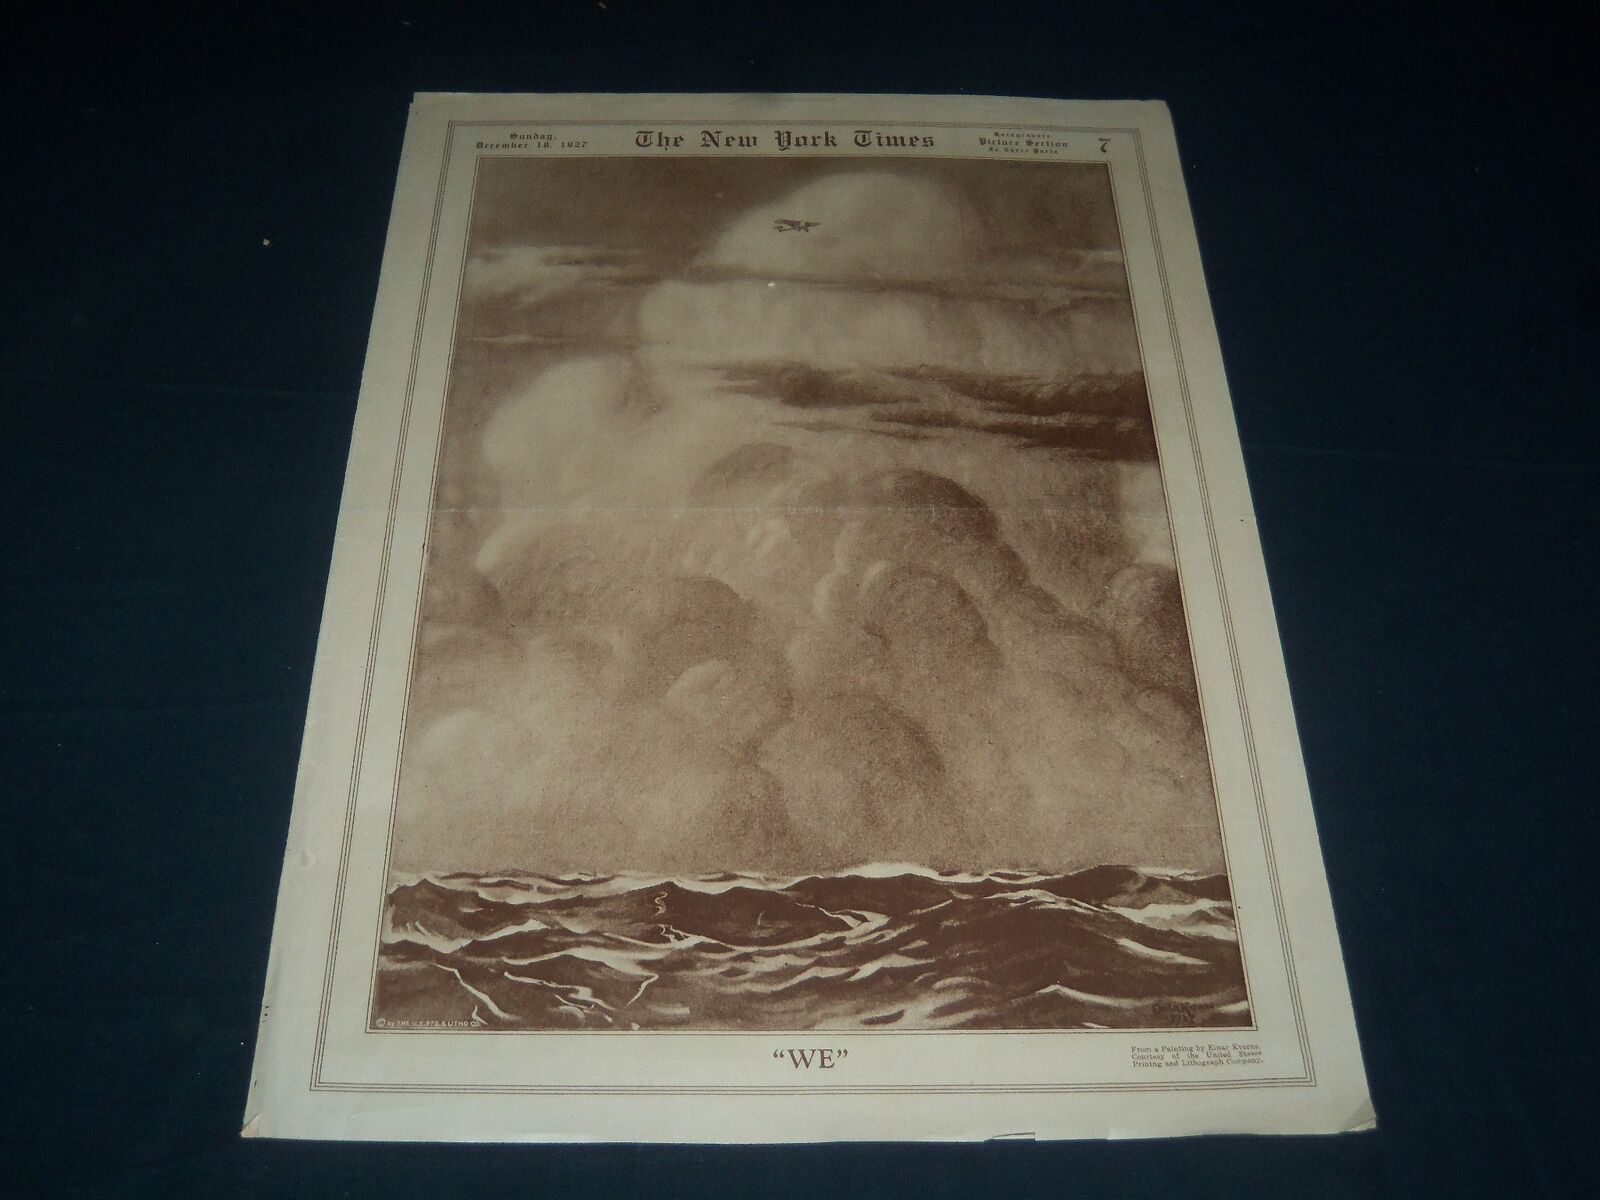 1927 DECEMBER 18 NEW YORK TIMES PICTURE SECTION - 